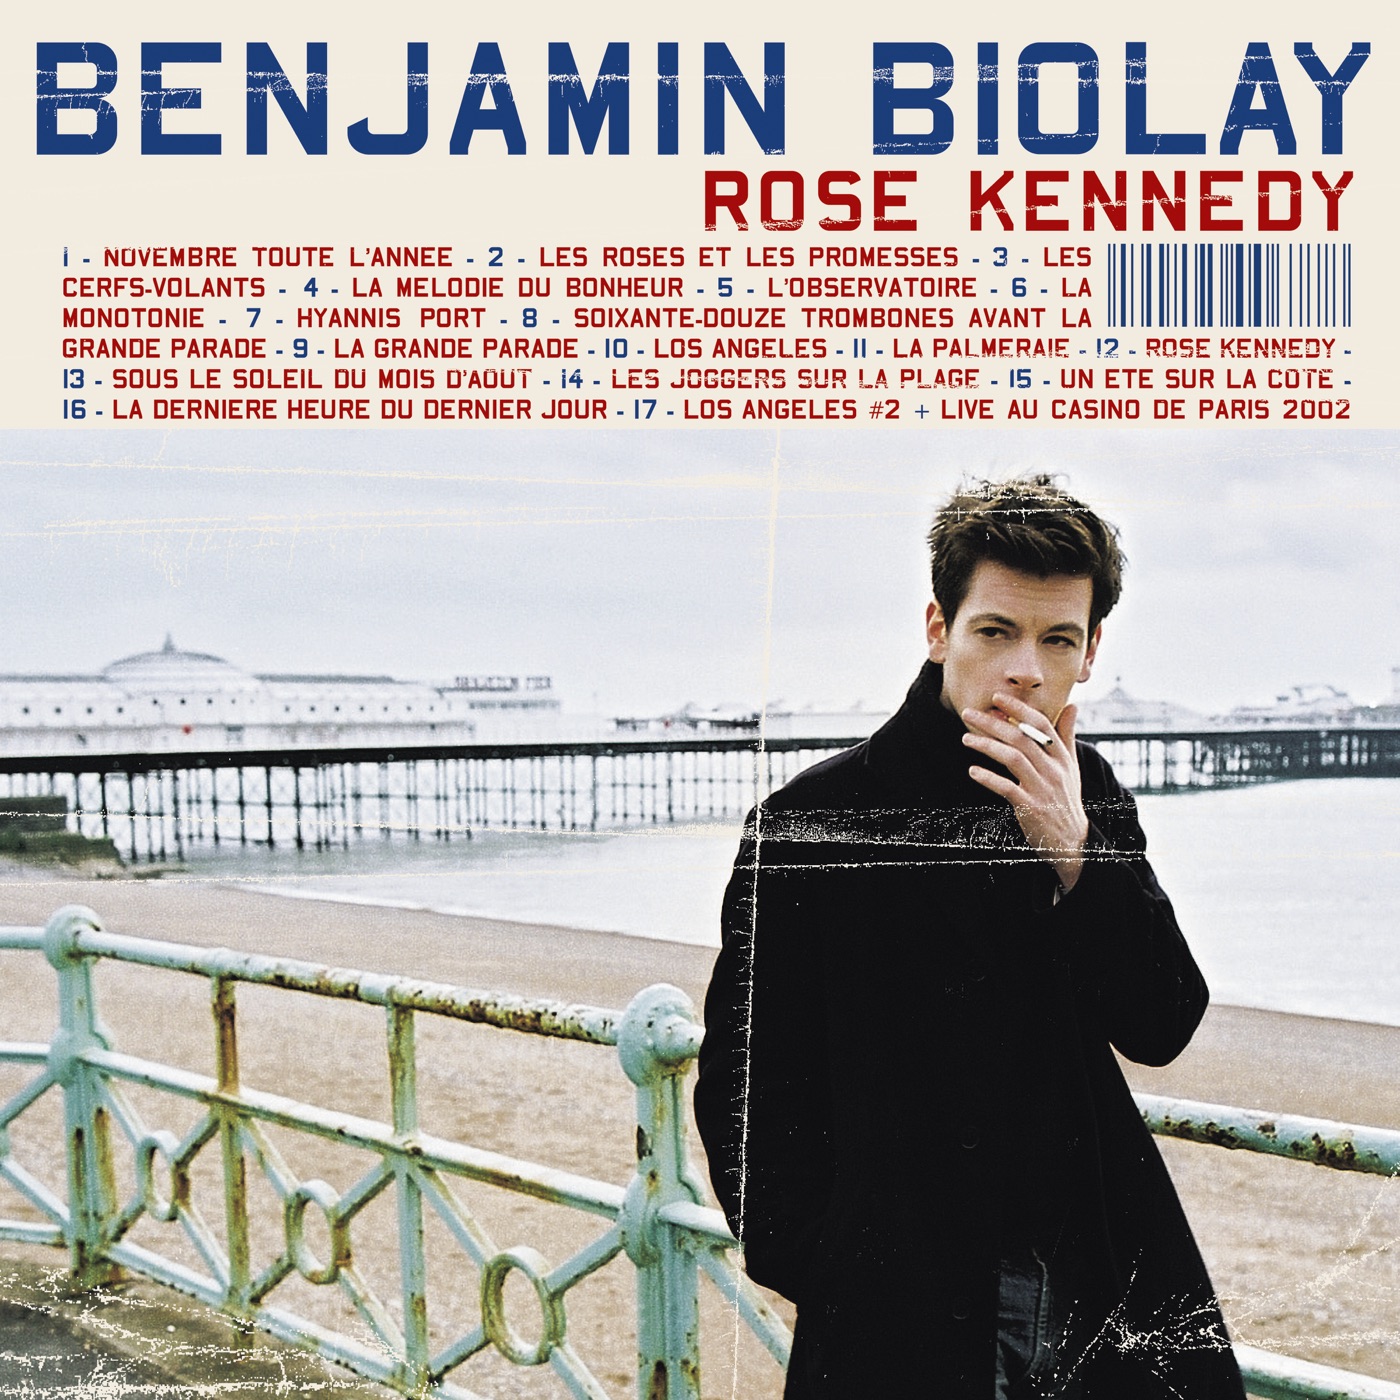 Rose Kennedy (Edition Deluxe) by Benjamin Biolay